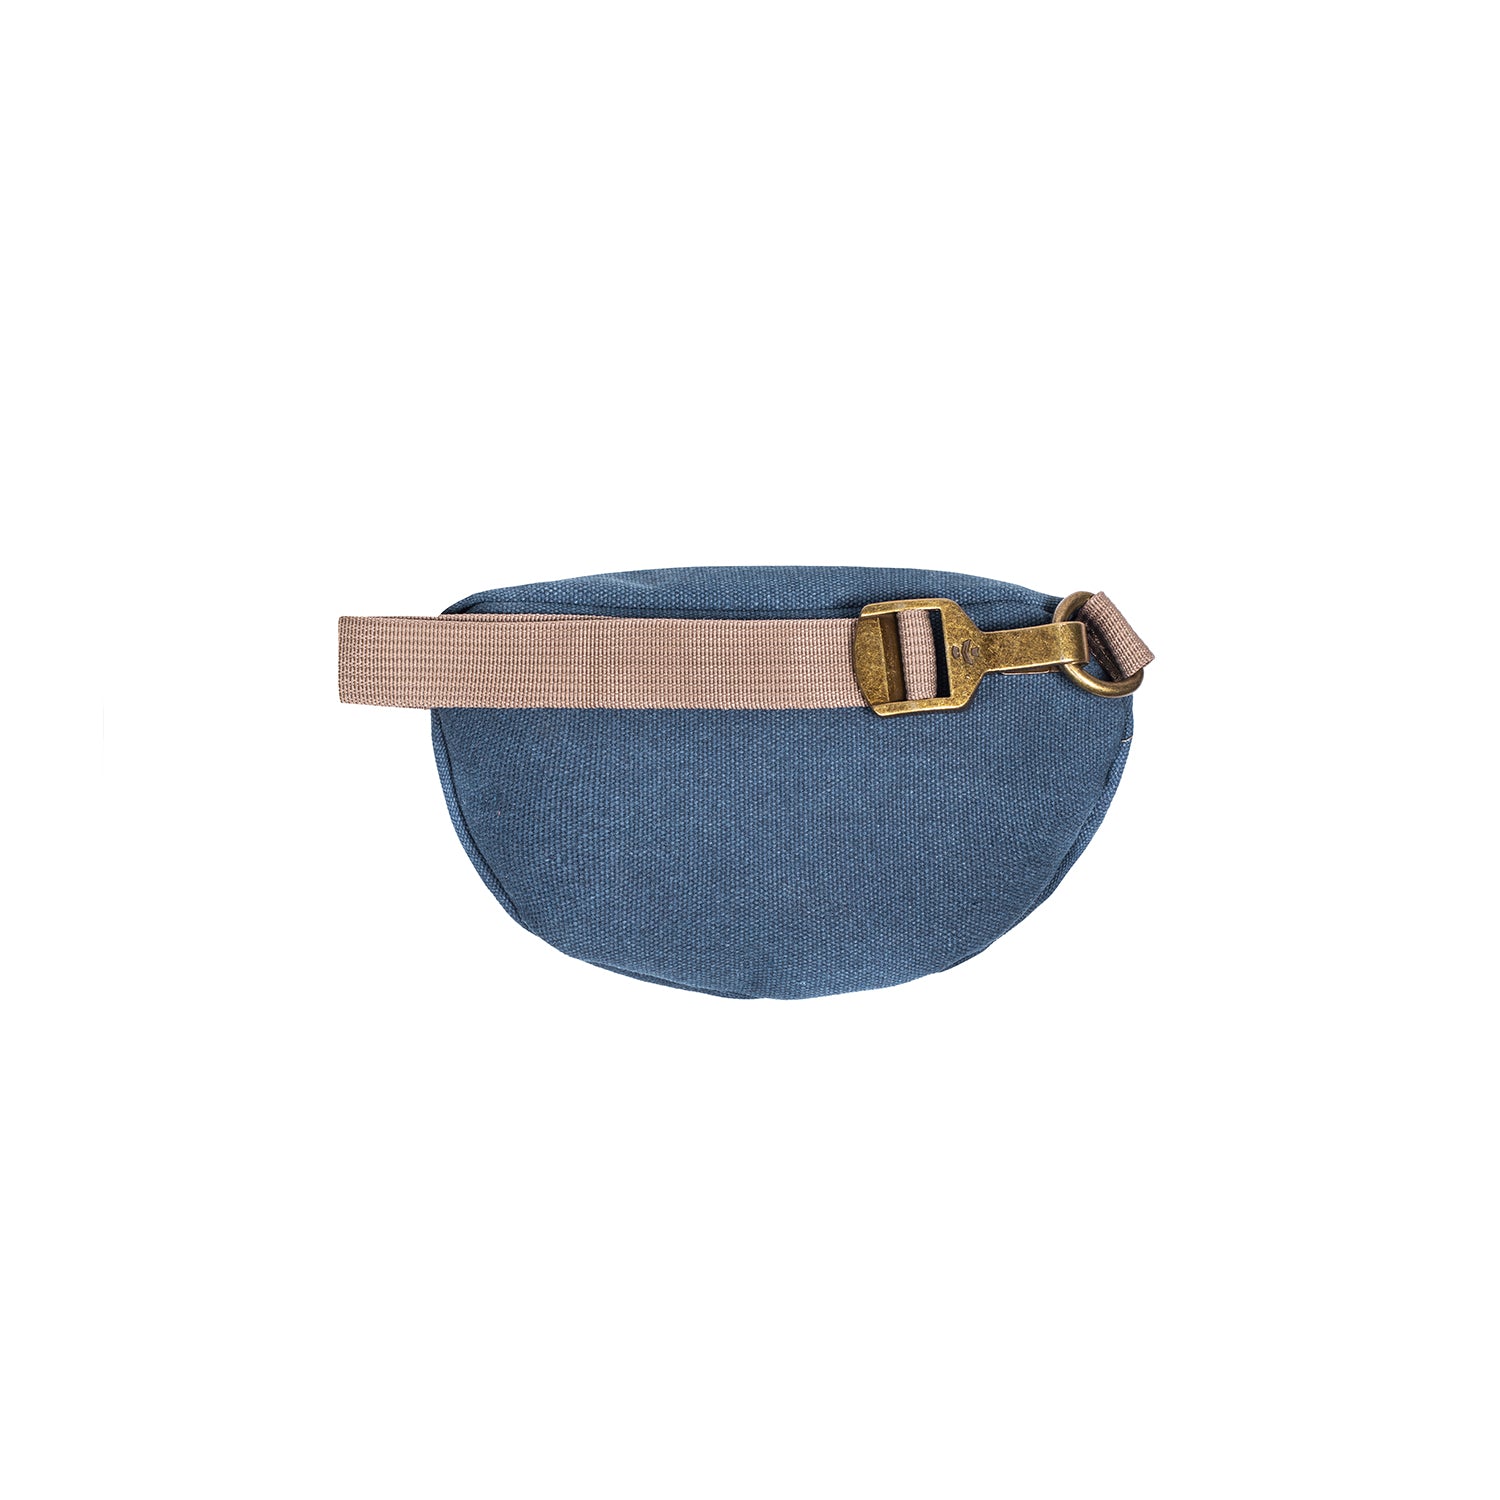 Marine Canvas Smell Proof Water Resistant Fanny Pack